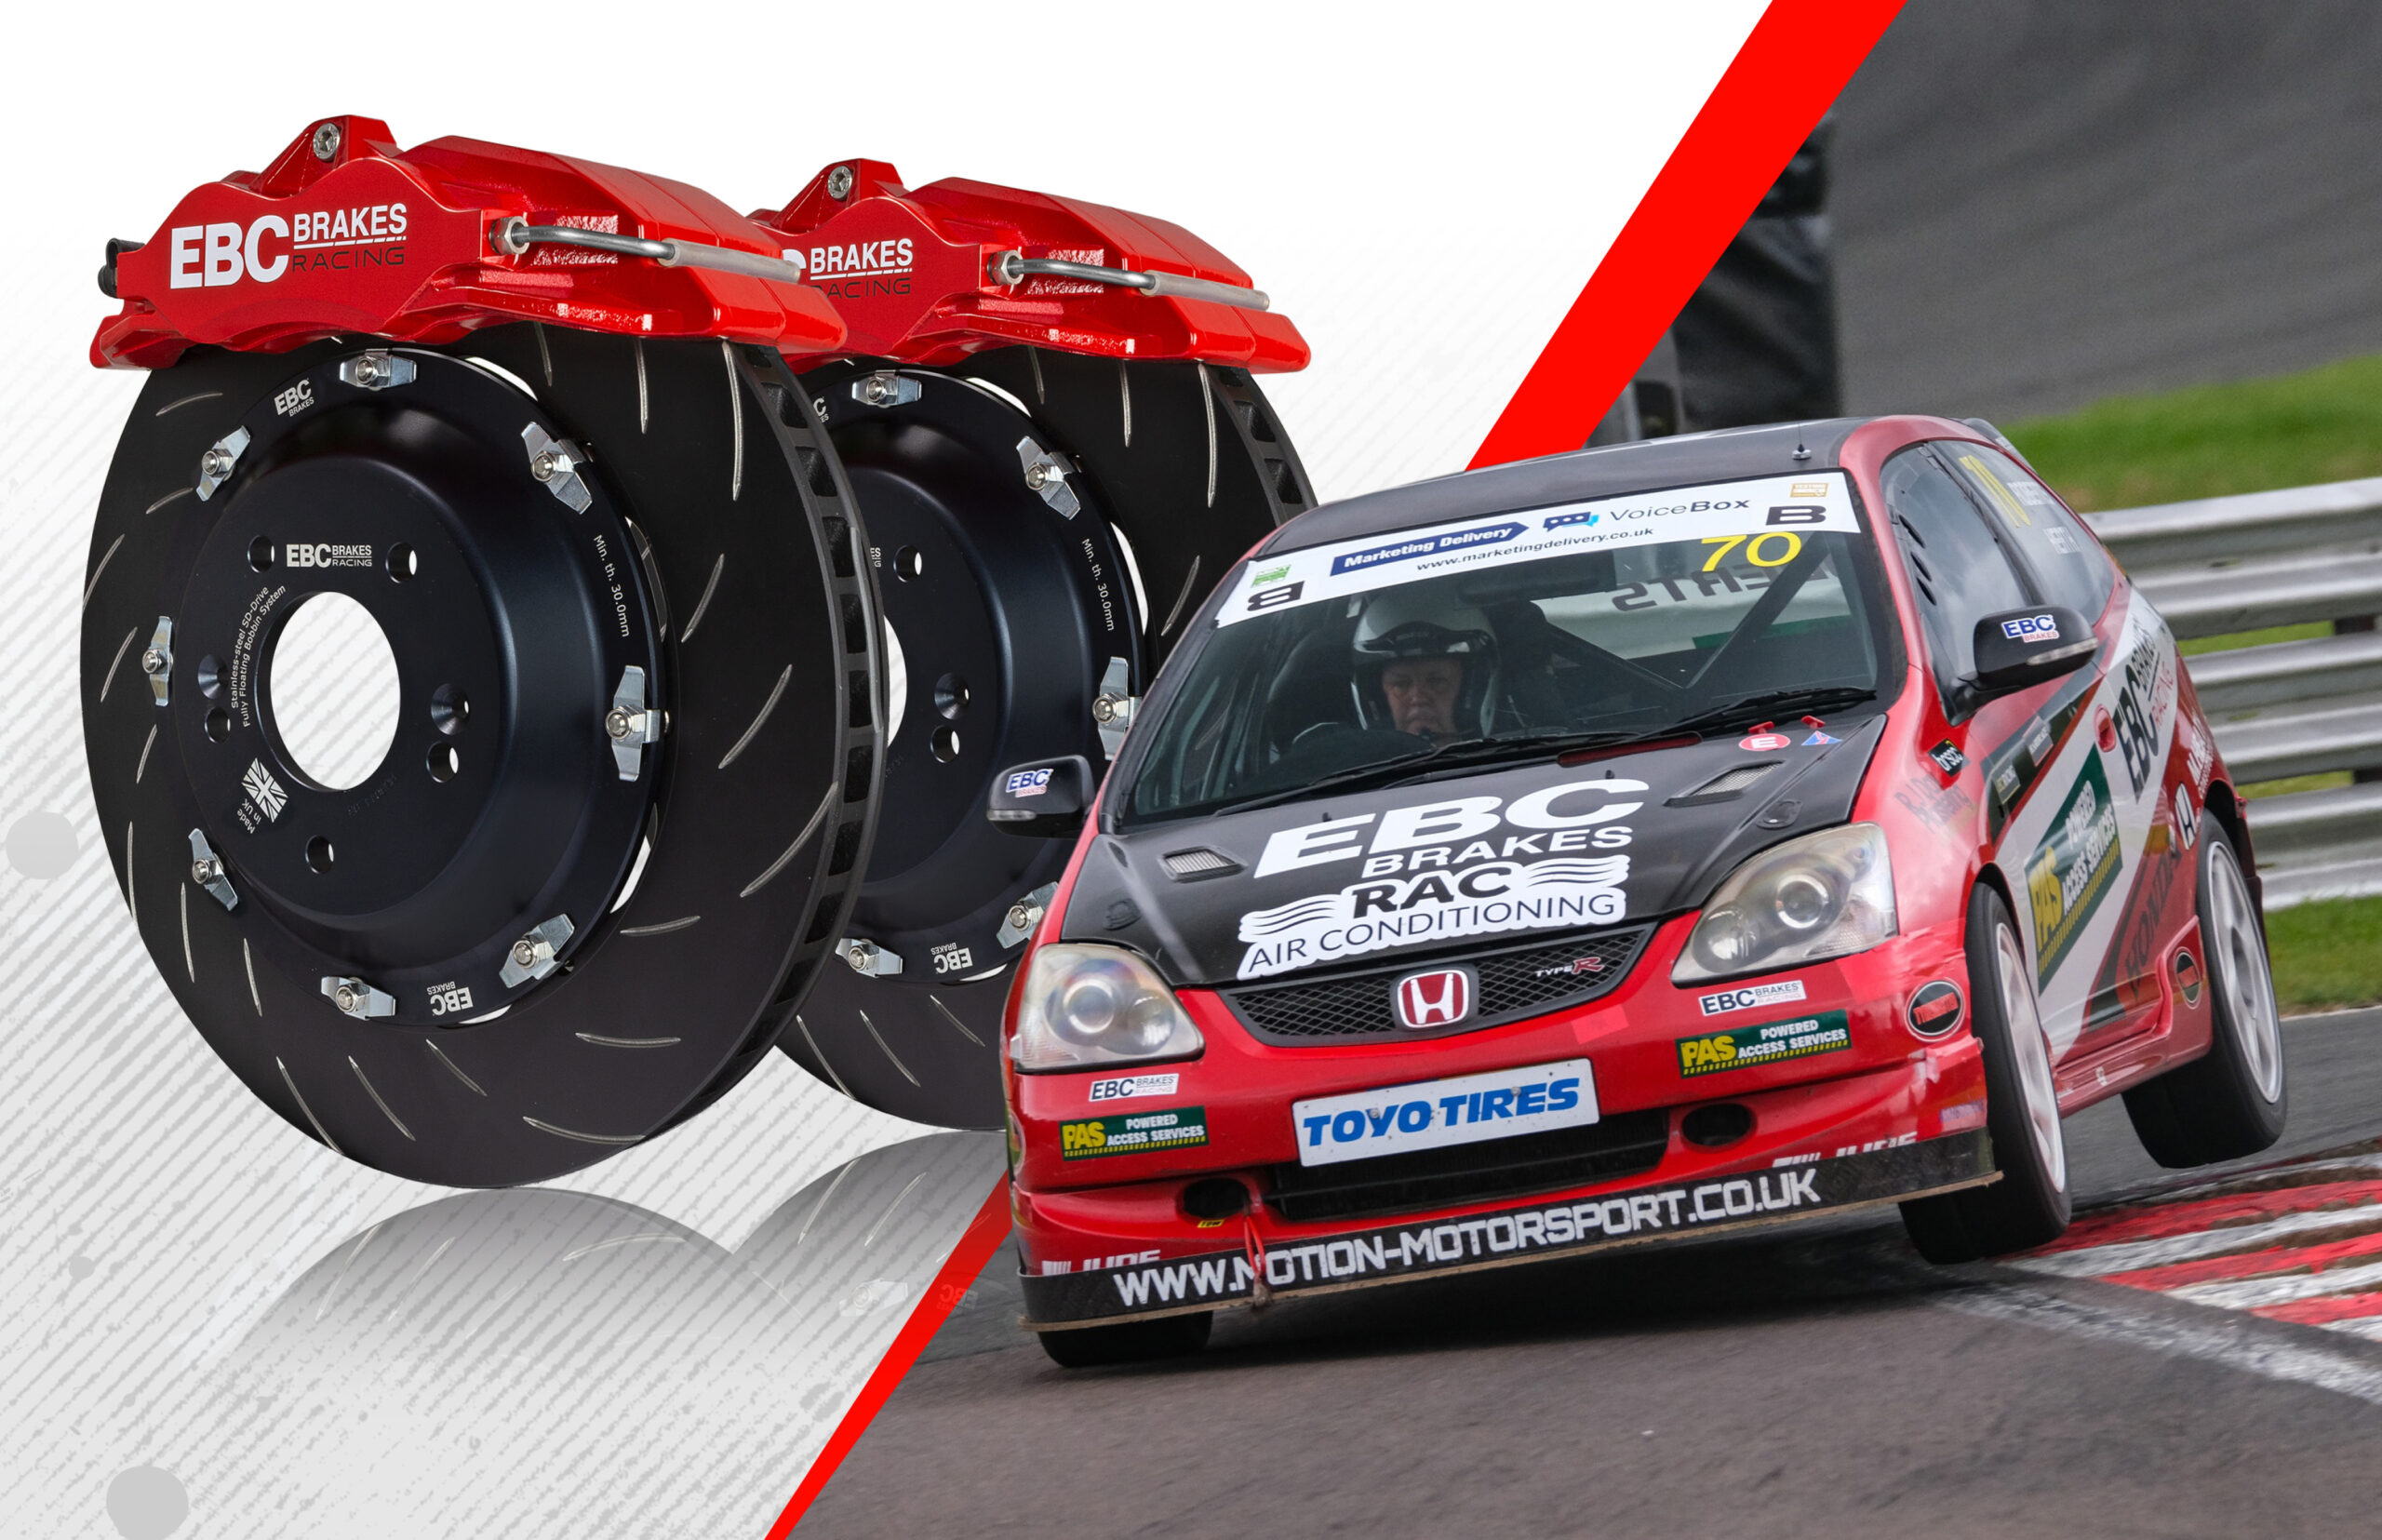 Apollo Big Brake Kits Now Available for the Honda Civic Type R (EP3) (Suspension Clearance Version)